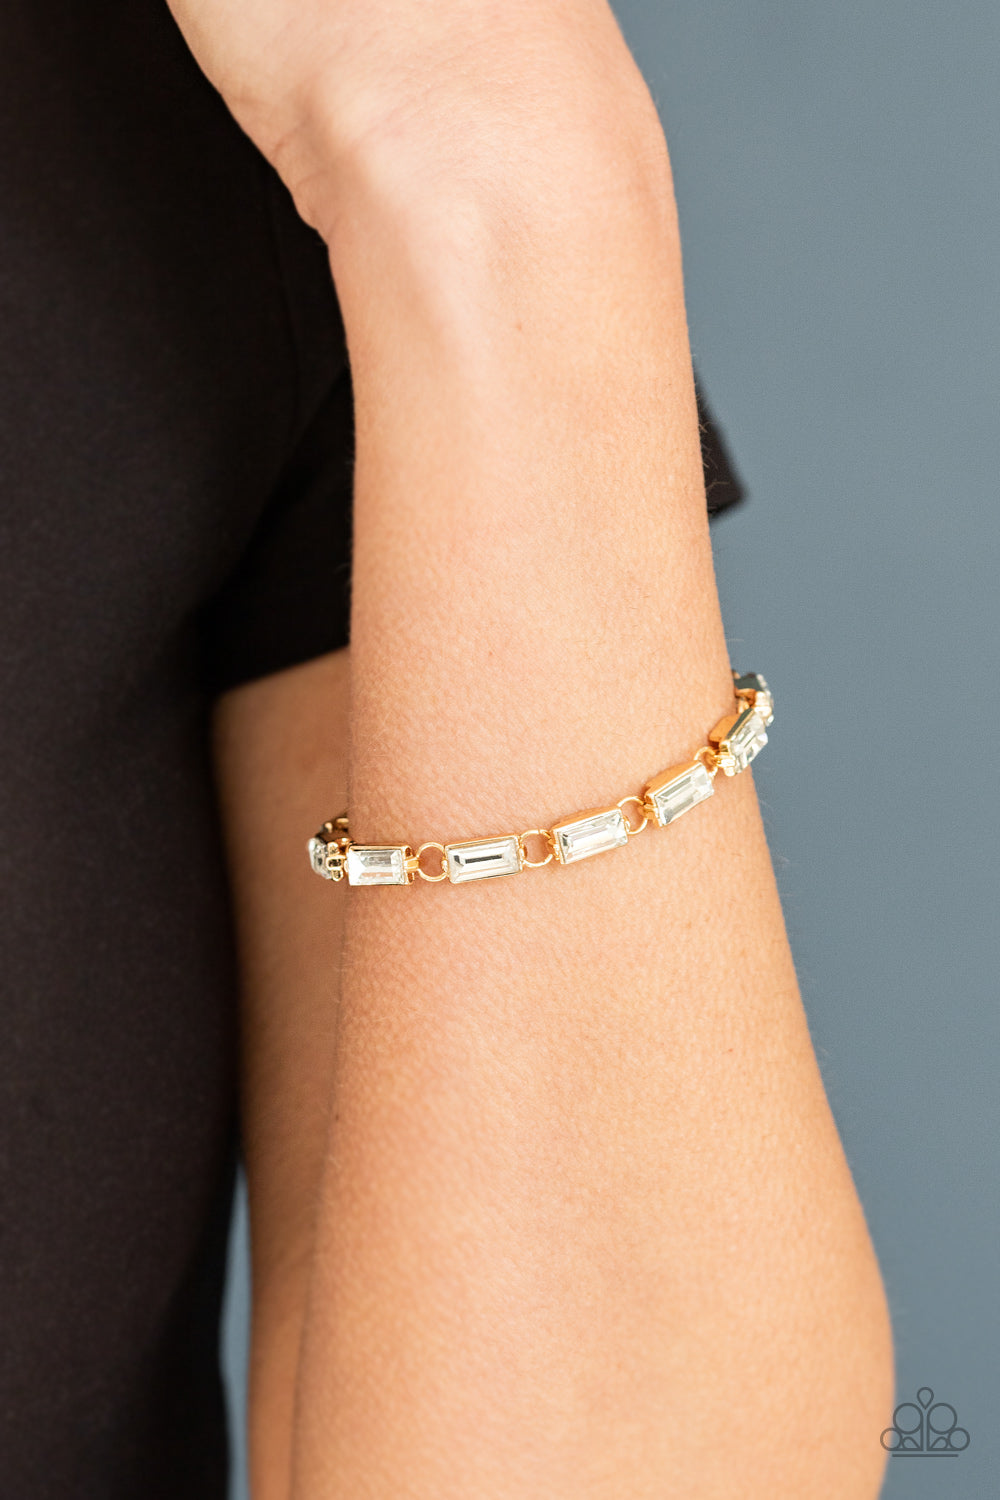 Irresistibly Icy Bracelet (Gold, Silver, White)